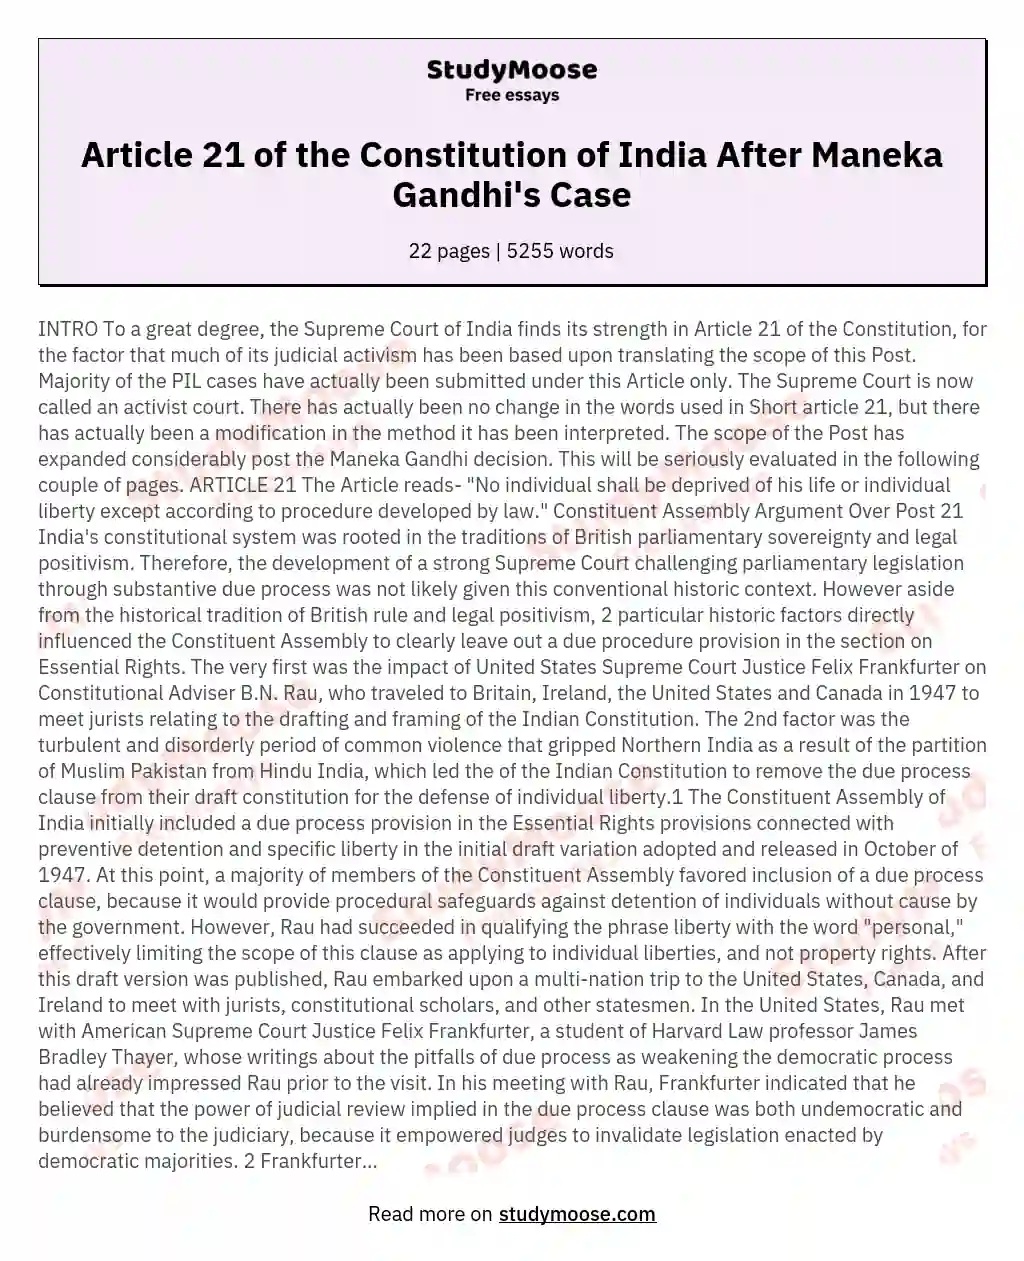 Article 21 of the Constitution of India After Maneka Gandhi's Case essay